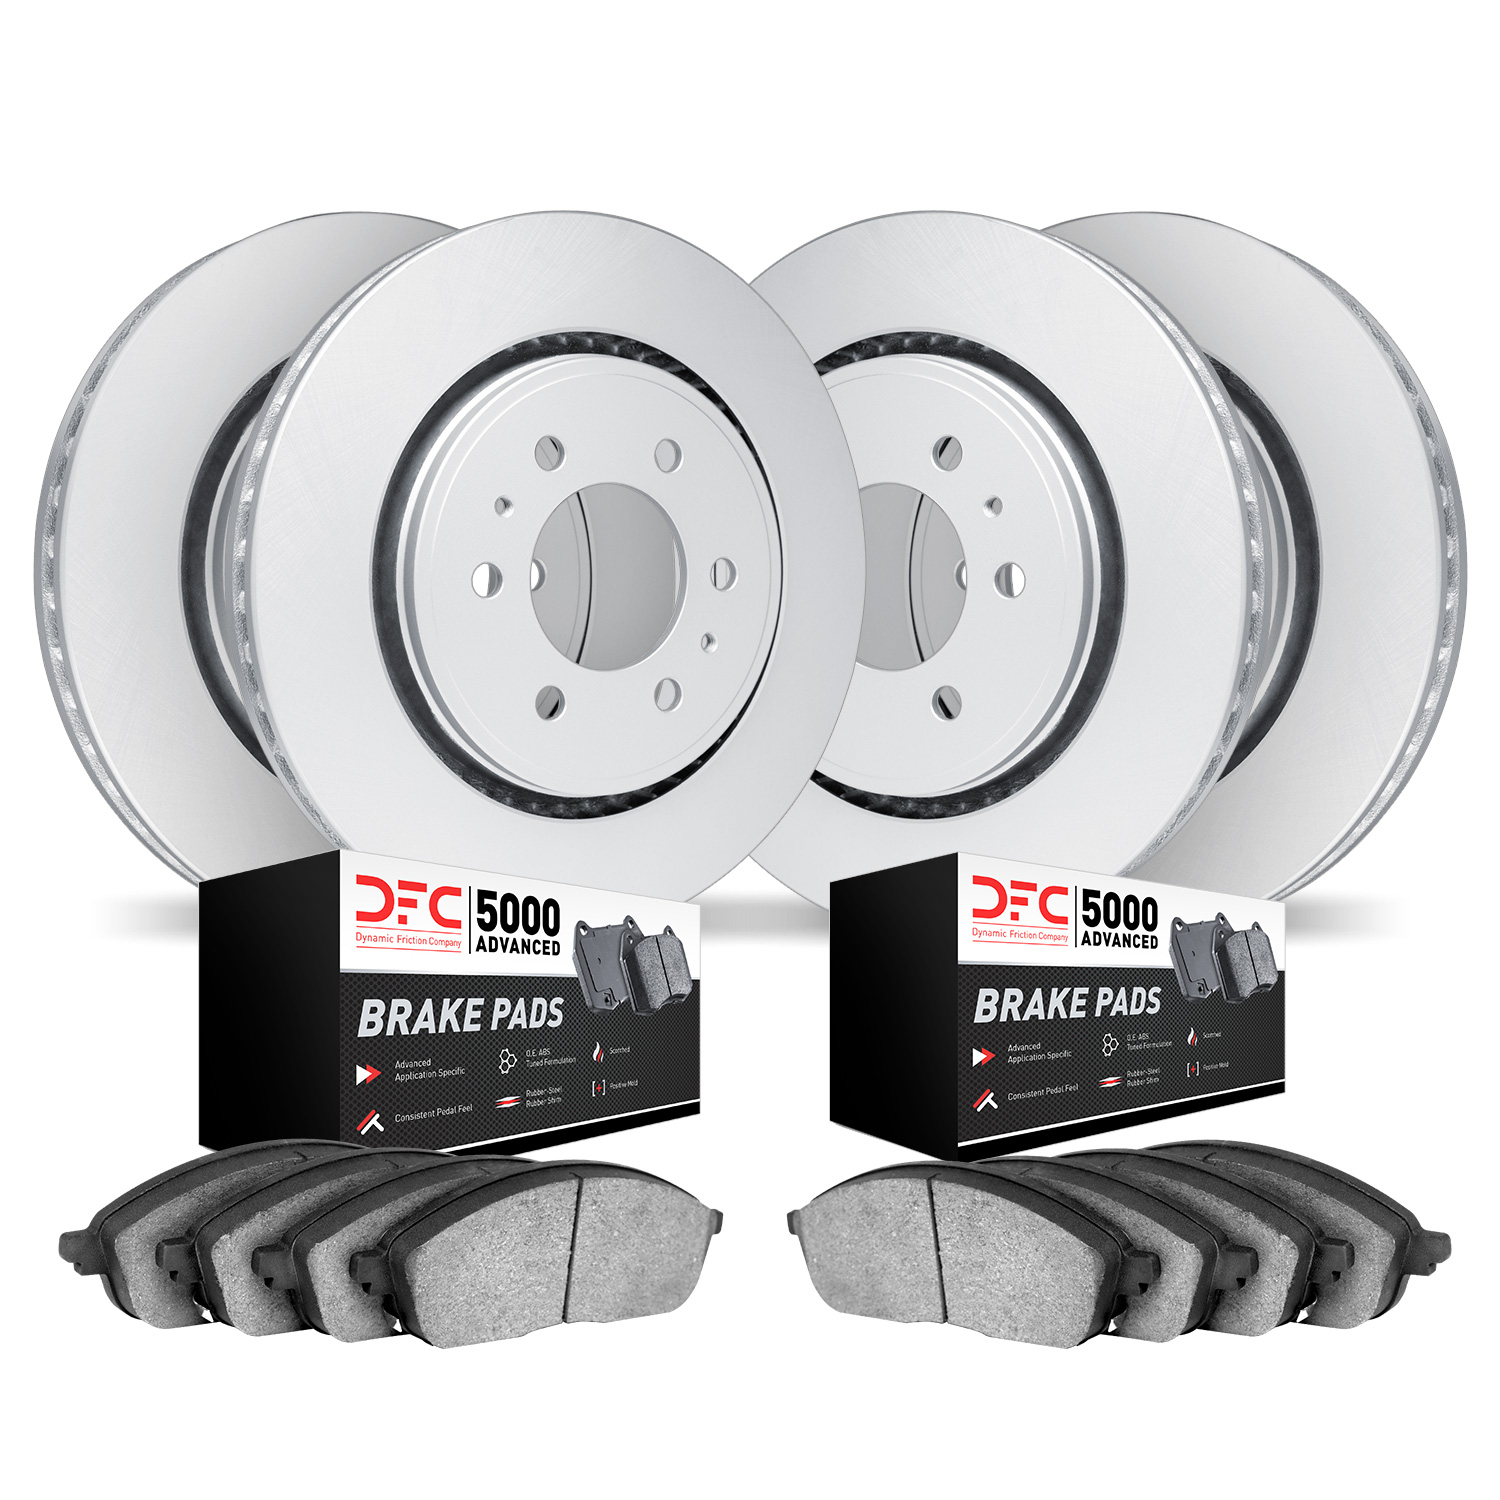 4504-76039 Geospec Brake Rotors w/5000 Advanced Brake Pads Kit, Fits Select Lexus/Toyota/Scion, Position: Front and Rear